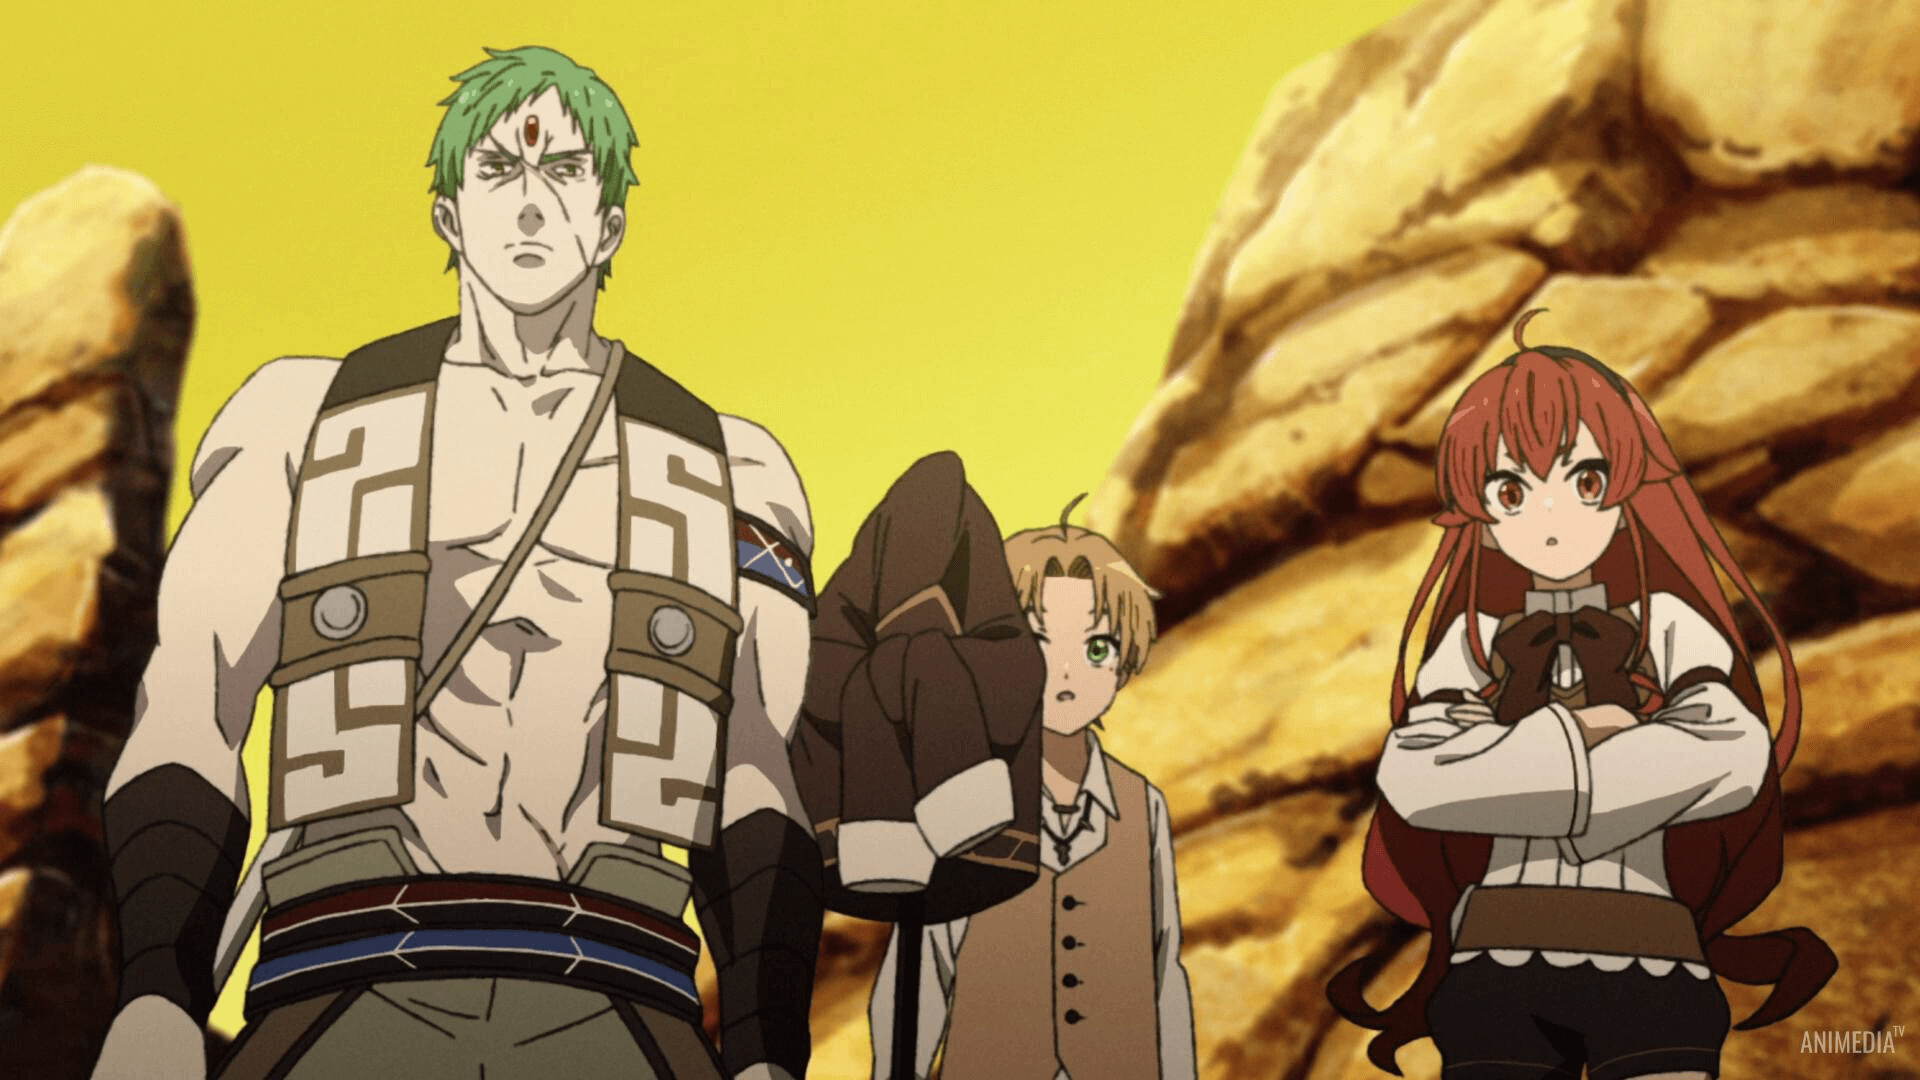 I HAVE SO MANY QUESTIONS!!, Mushoku Tensei S2 Ep 9 Reaction